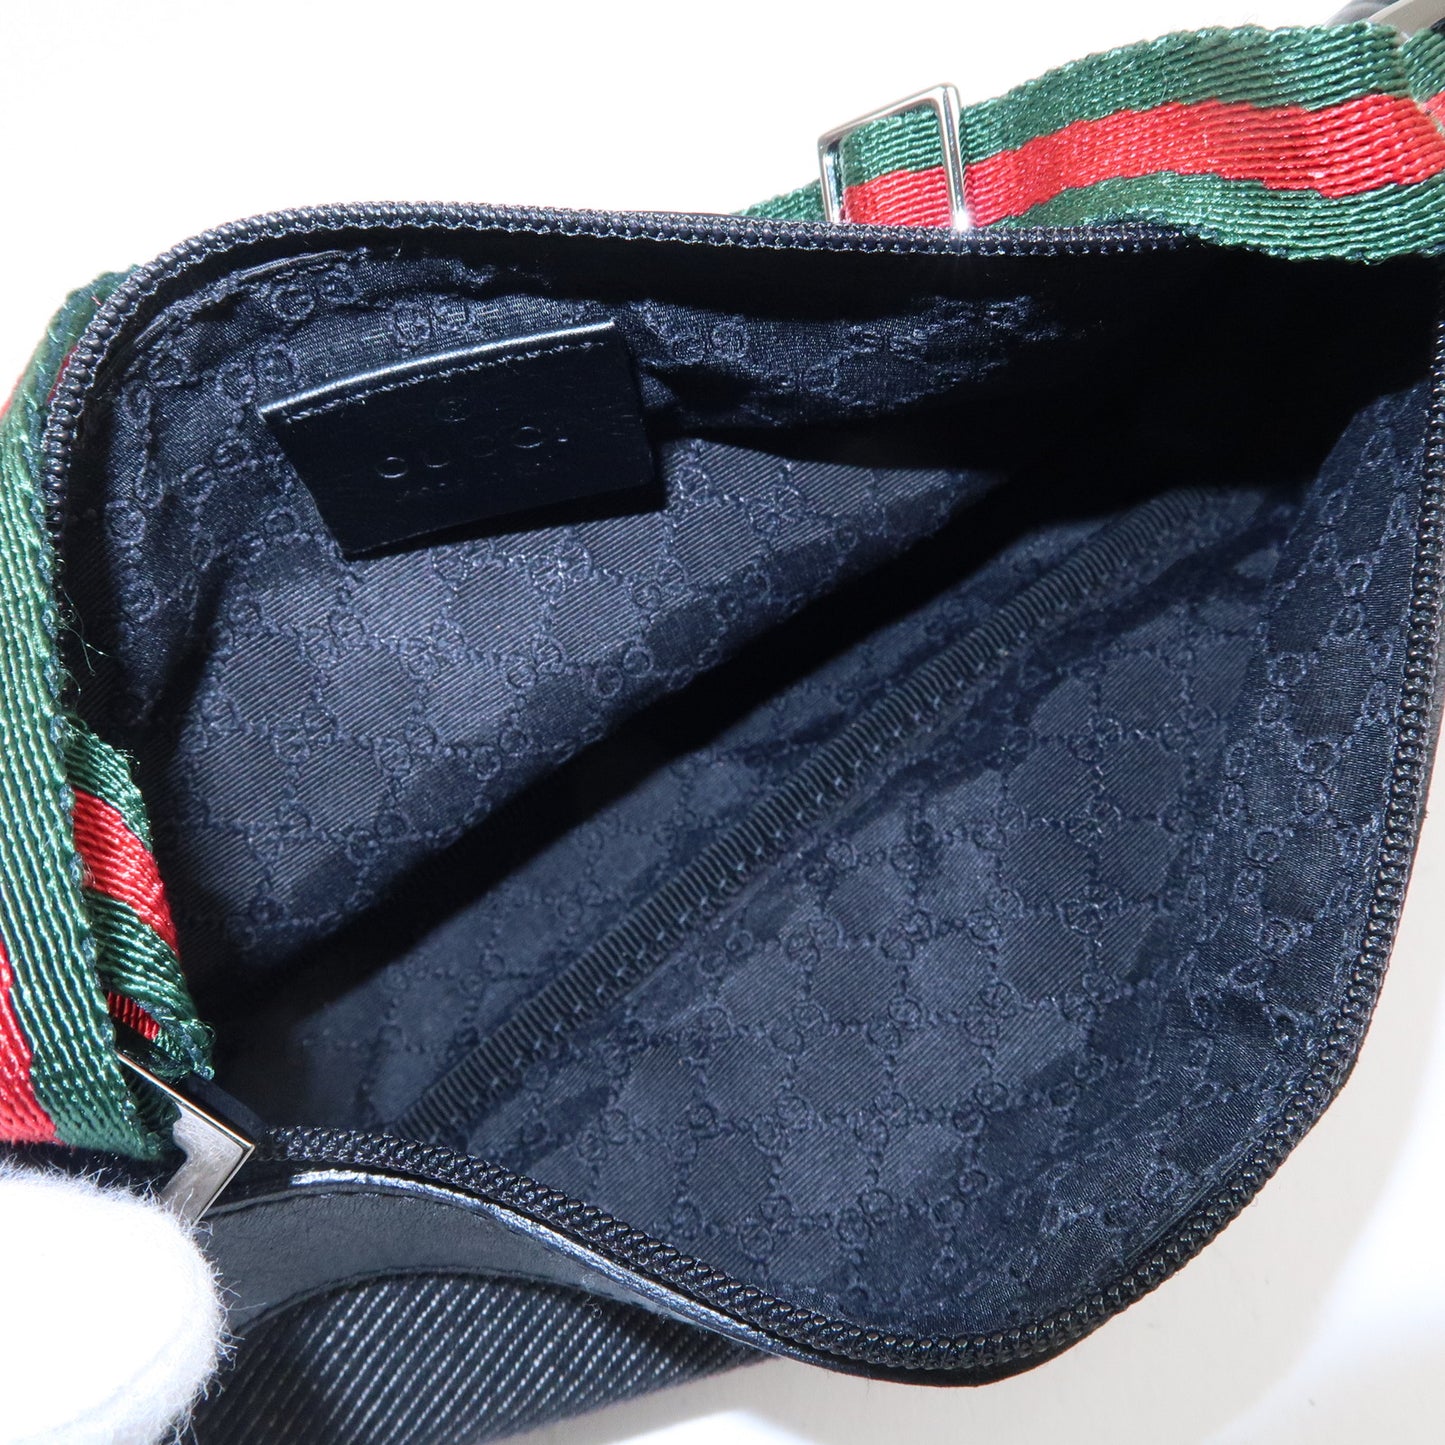 GUCCI Sherry Denim Leather Accessory Pouch Black 92820